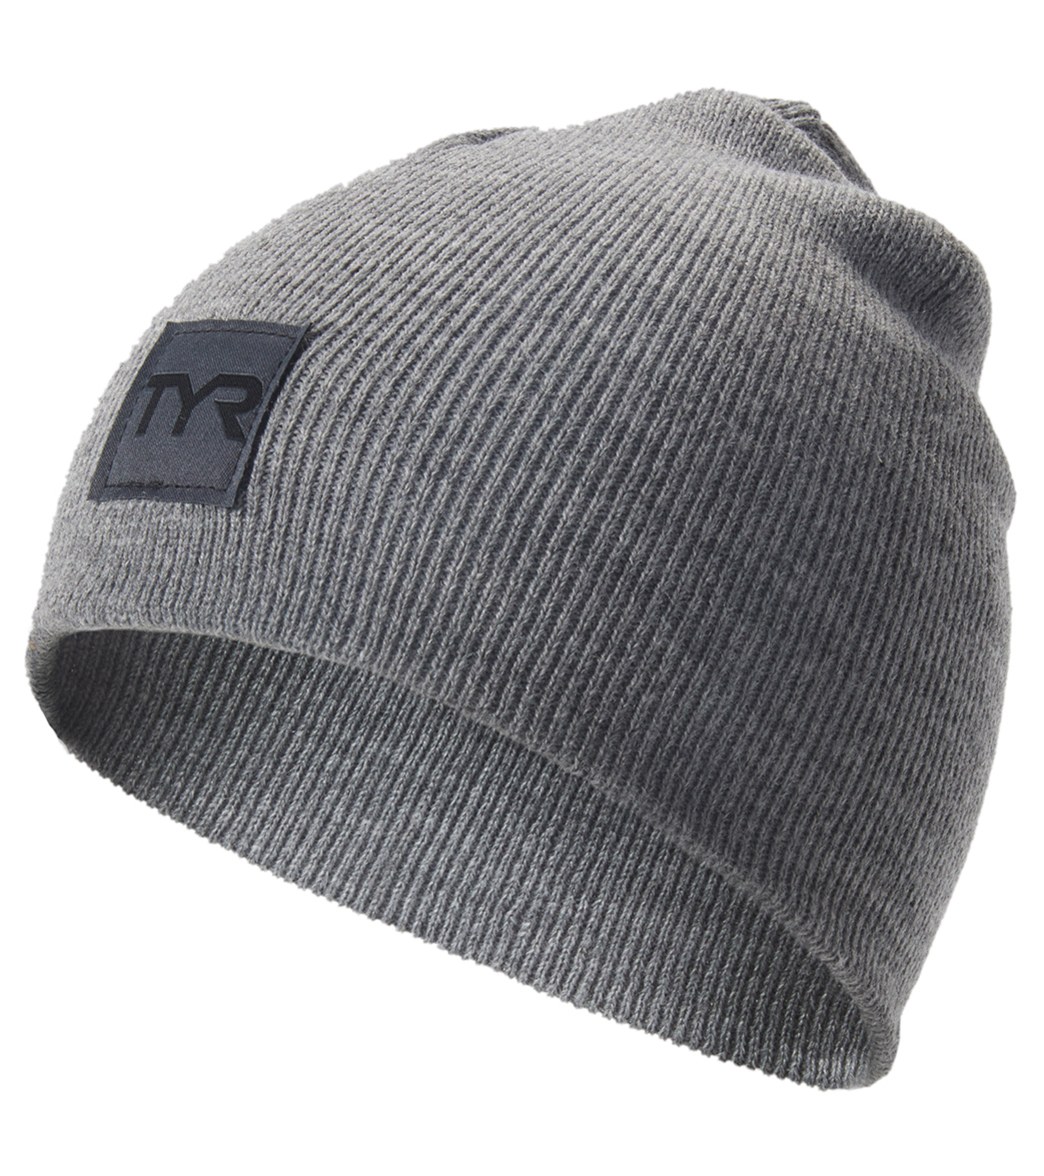 TYR Knit Beanie - Light One Size - Swimoutlet.com